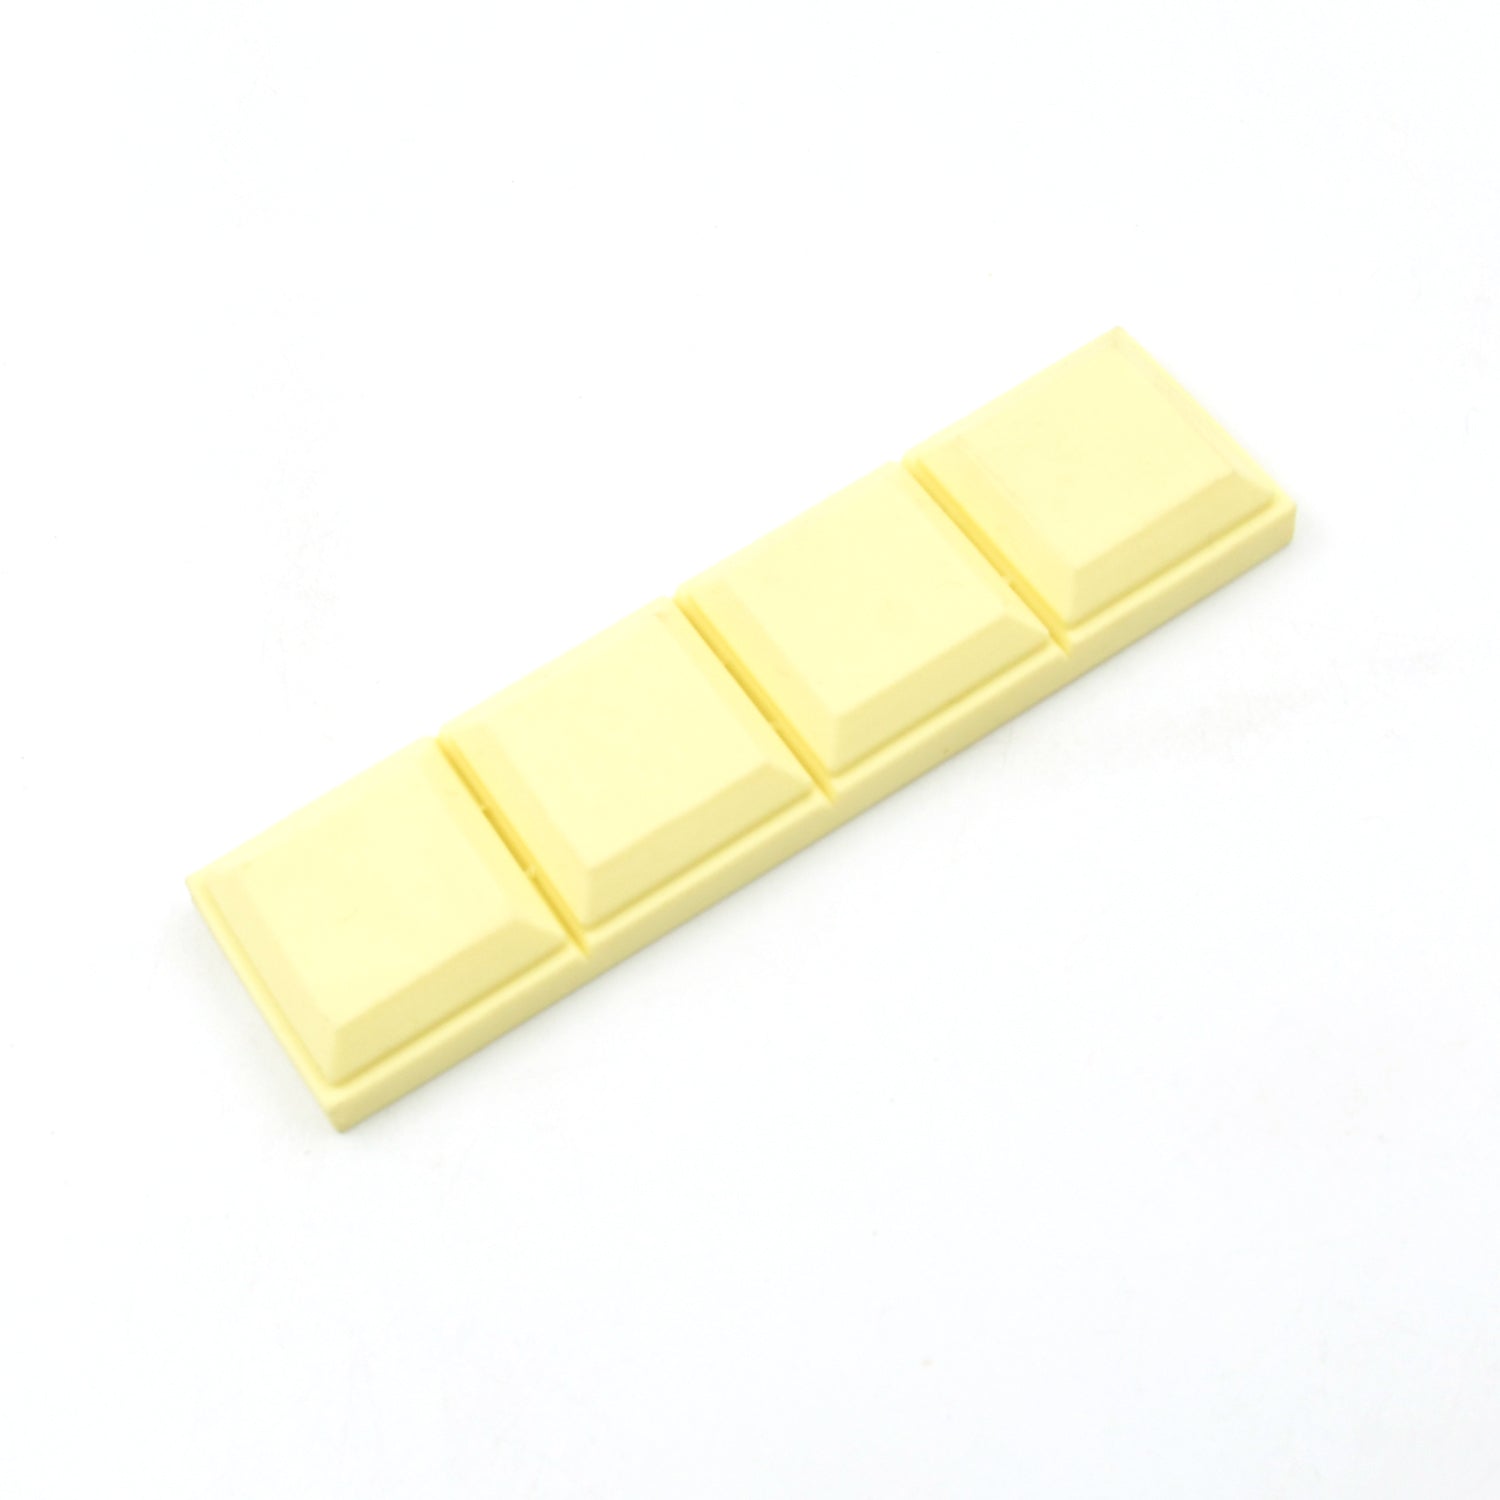 4168 3D Chocolate Shaped Erasers Soft Pencil Erasers Supplies for Office School Students Drawing Writing Classroom Rewards for Return Gift, Birthday Party, School Prize (1 Pc 4 grid)